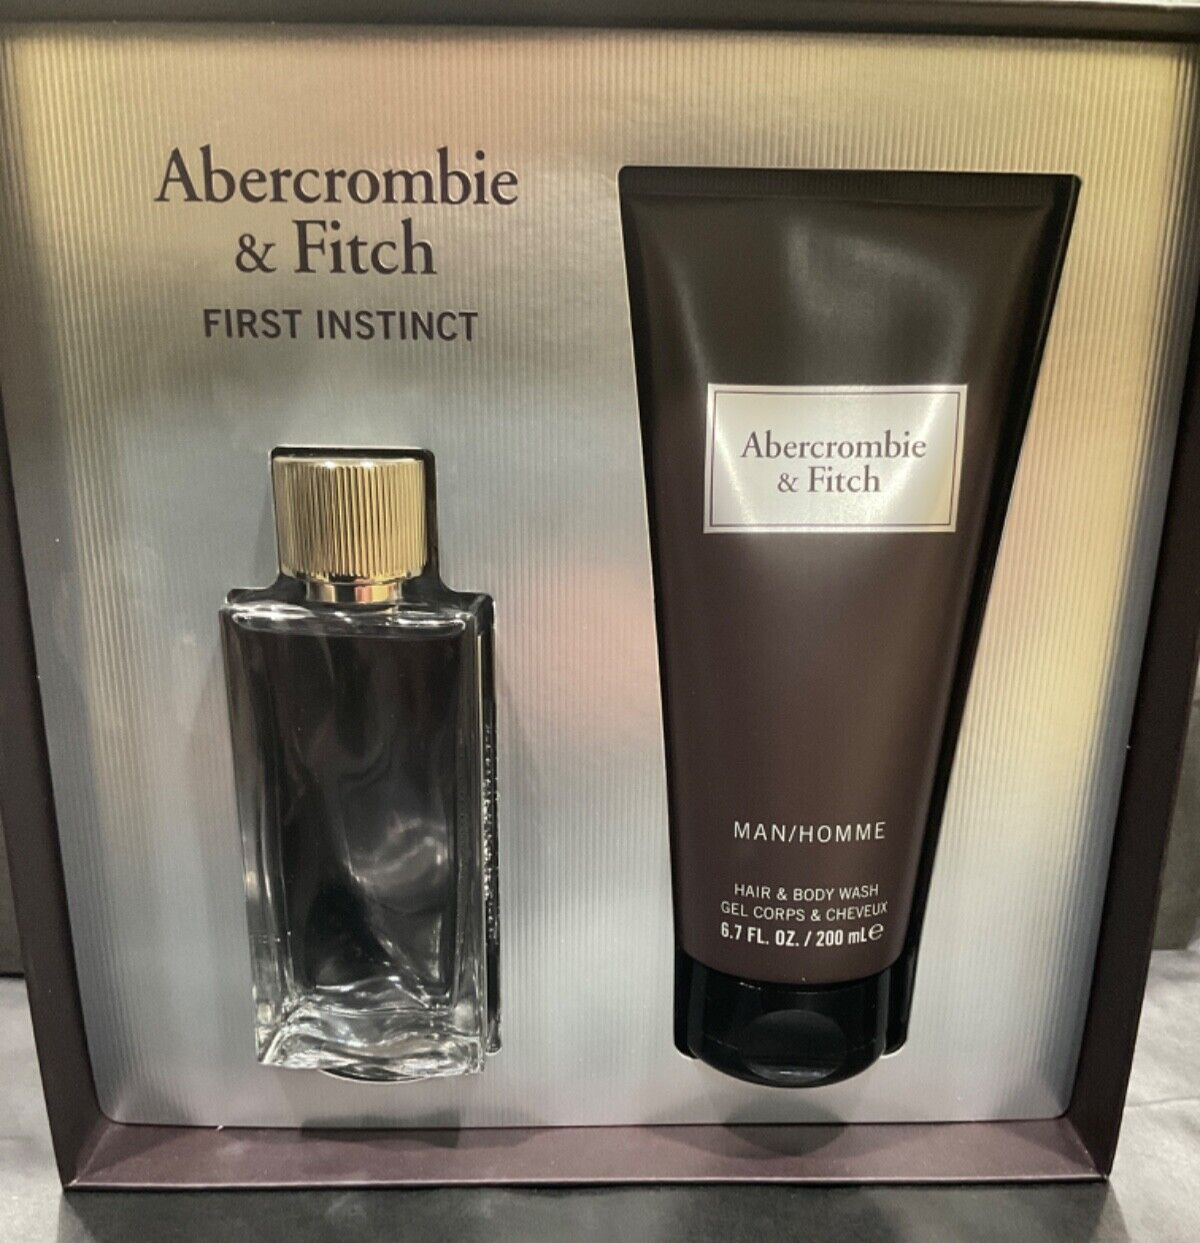 Primary image for First Instinct by Abercrombie & Fitch 3.4 oz EDT Cologne 2 pc set box damaged